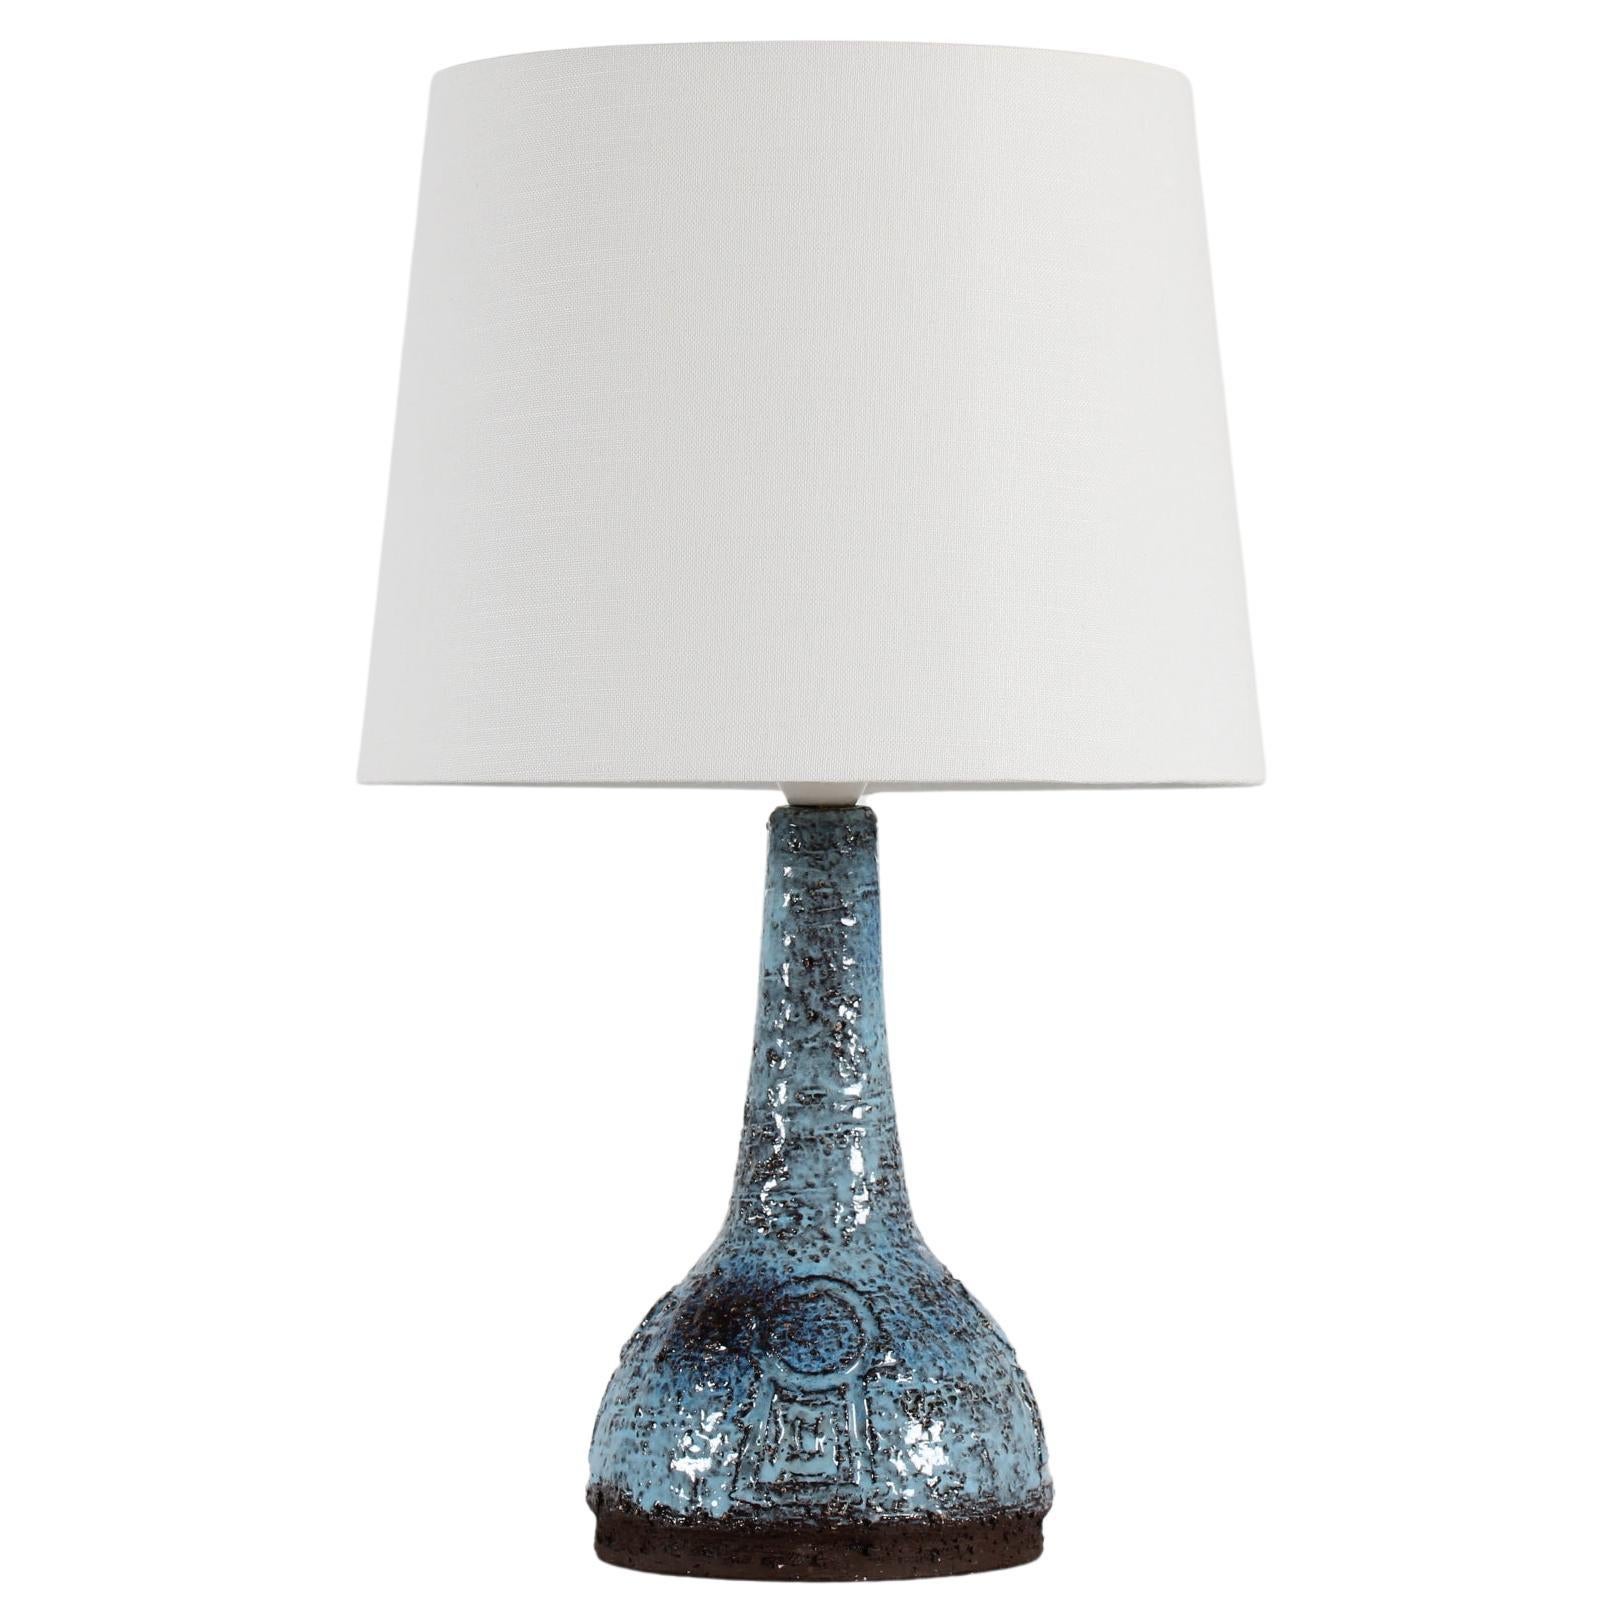 Danish Brutalist Ceramic Table Lamp by Artist Sejer with Blue Glaze Unica 1970s For Sale